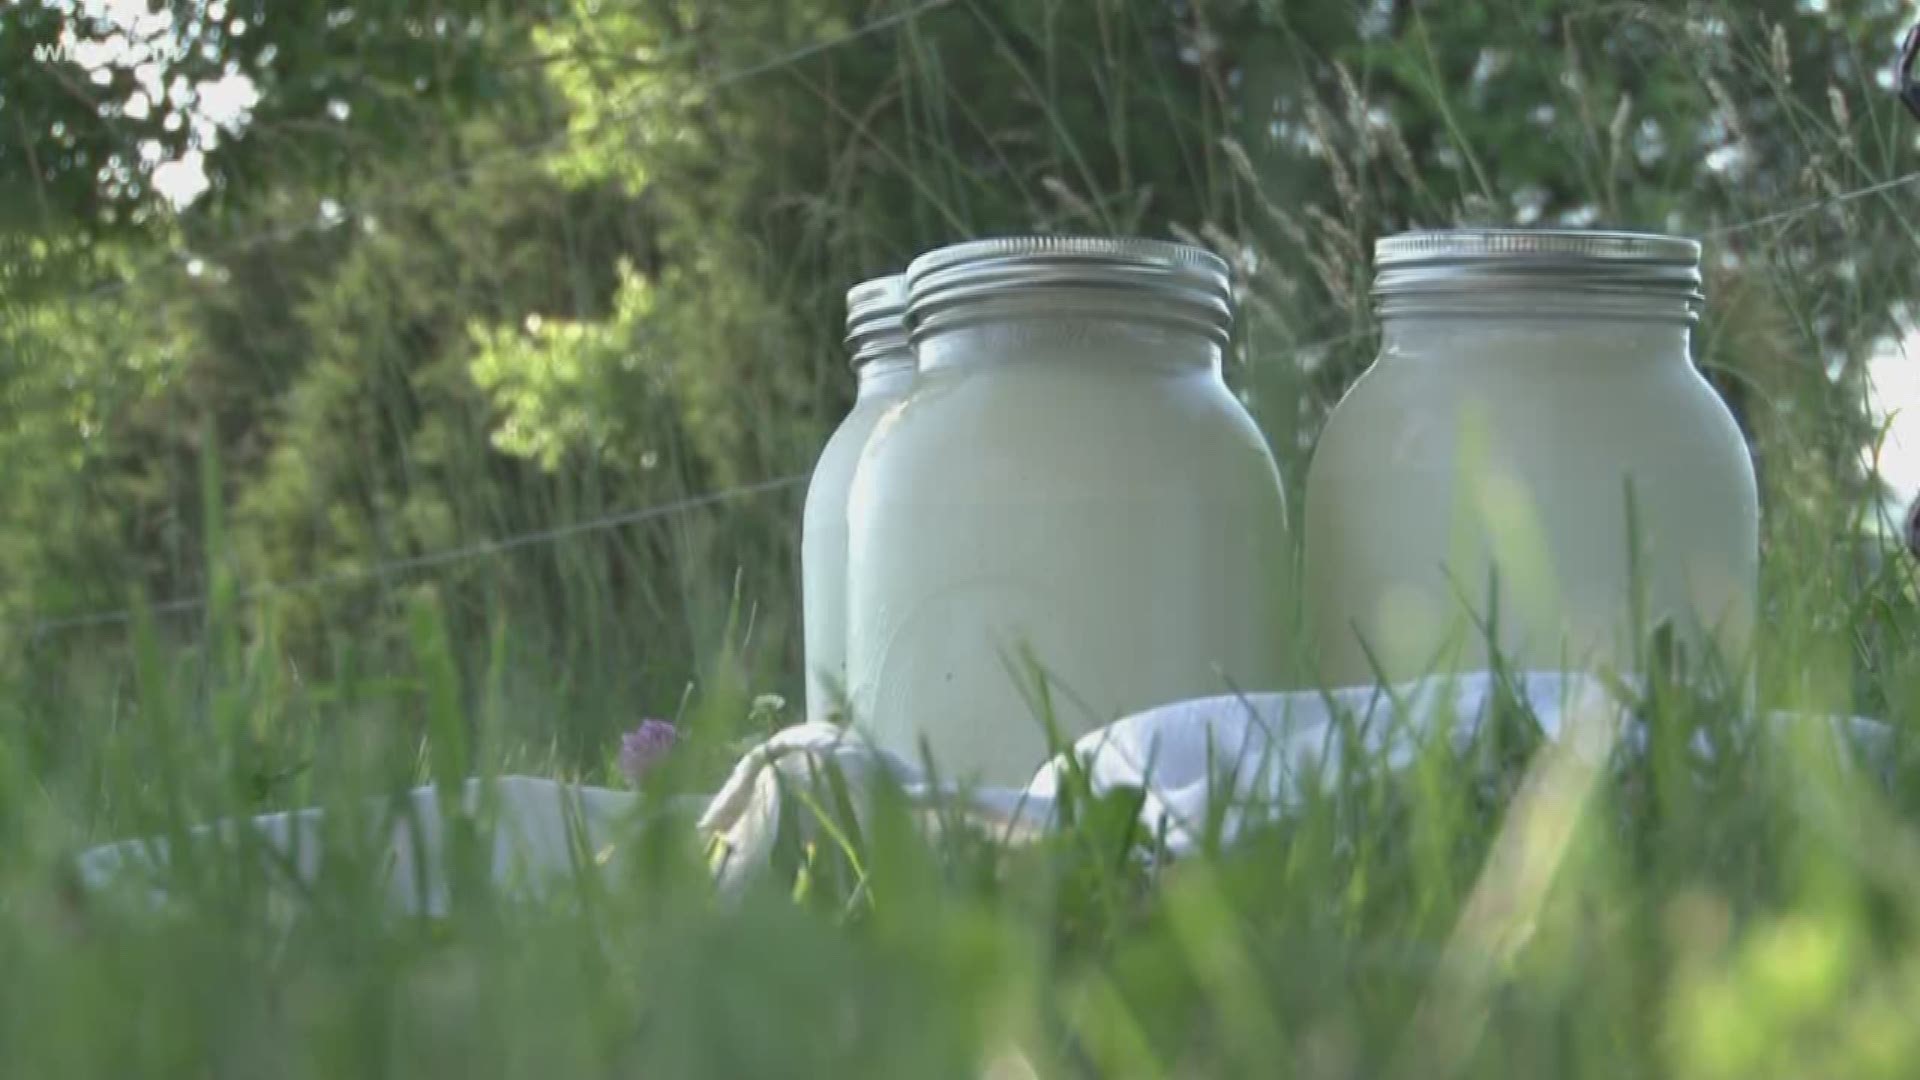 Health officials in Knoxville said children were hospitalized for e. coli they believe they got from drinking raw milk.